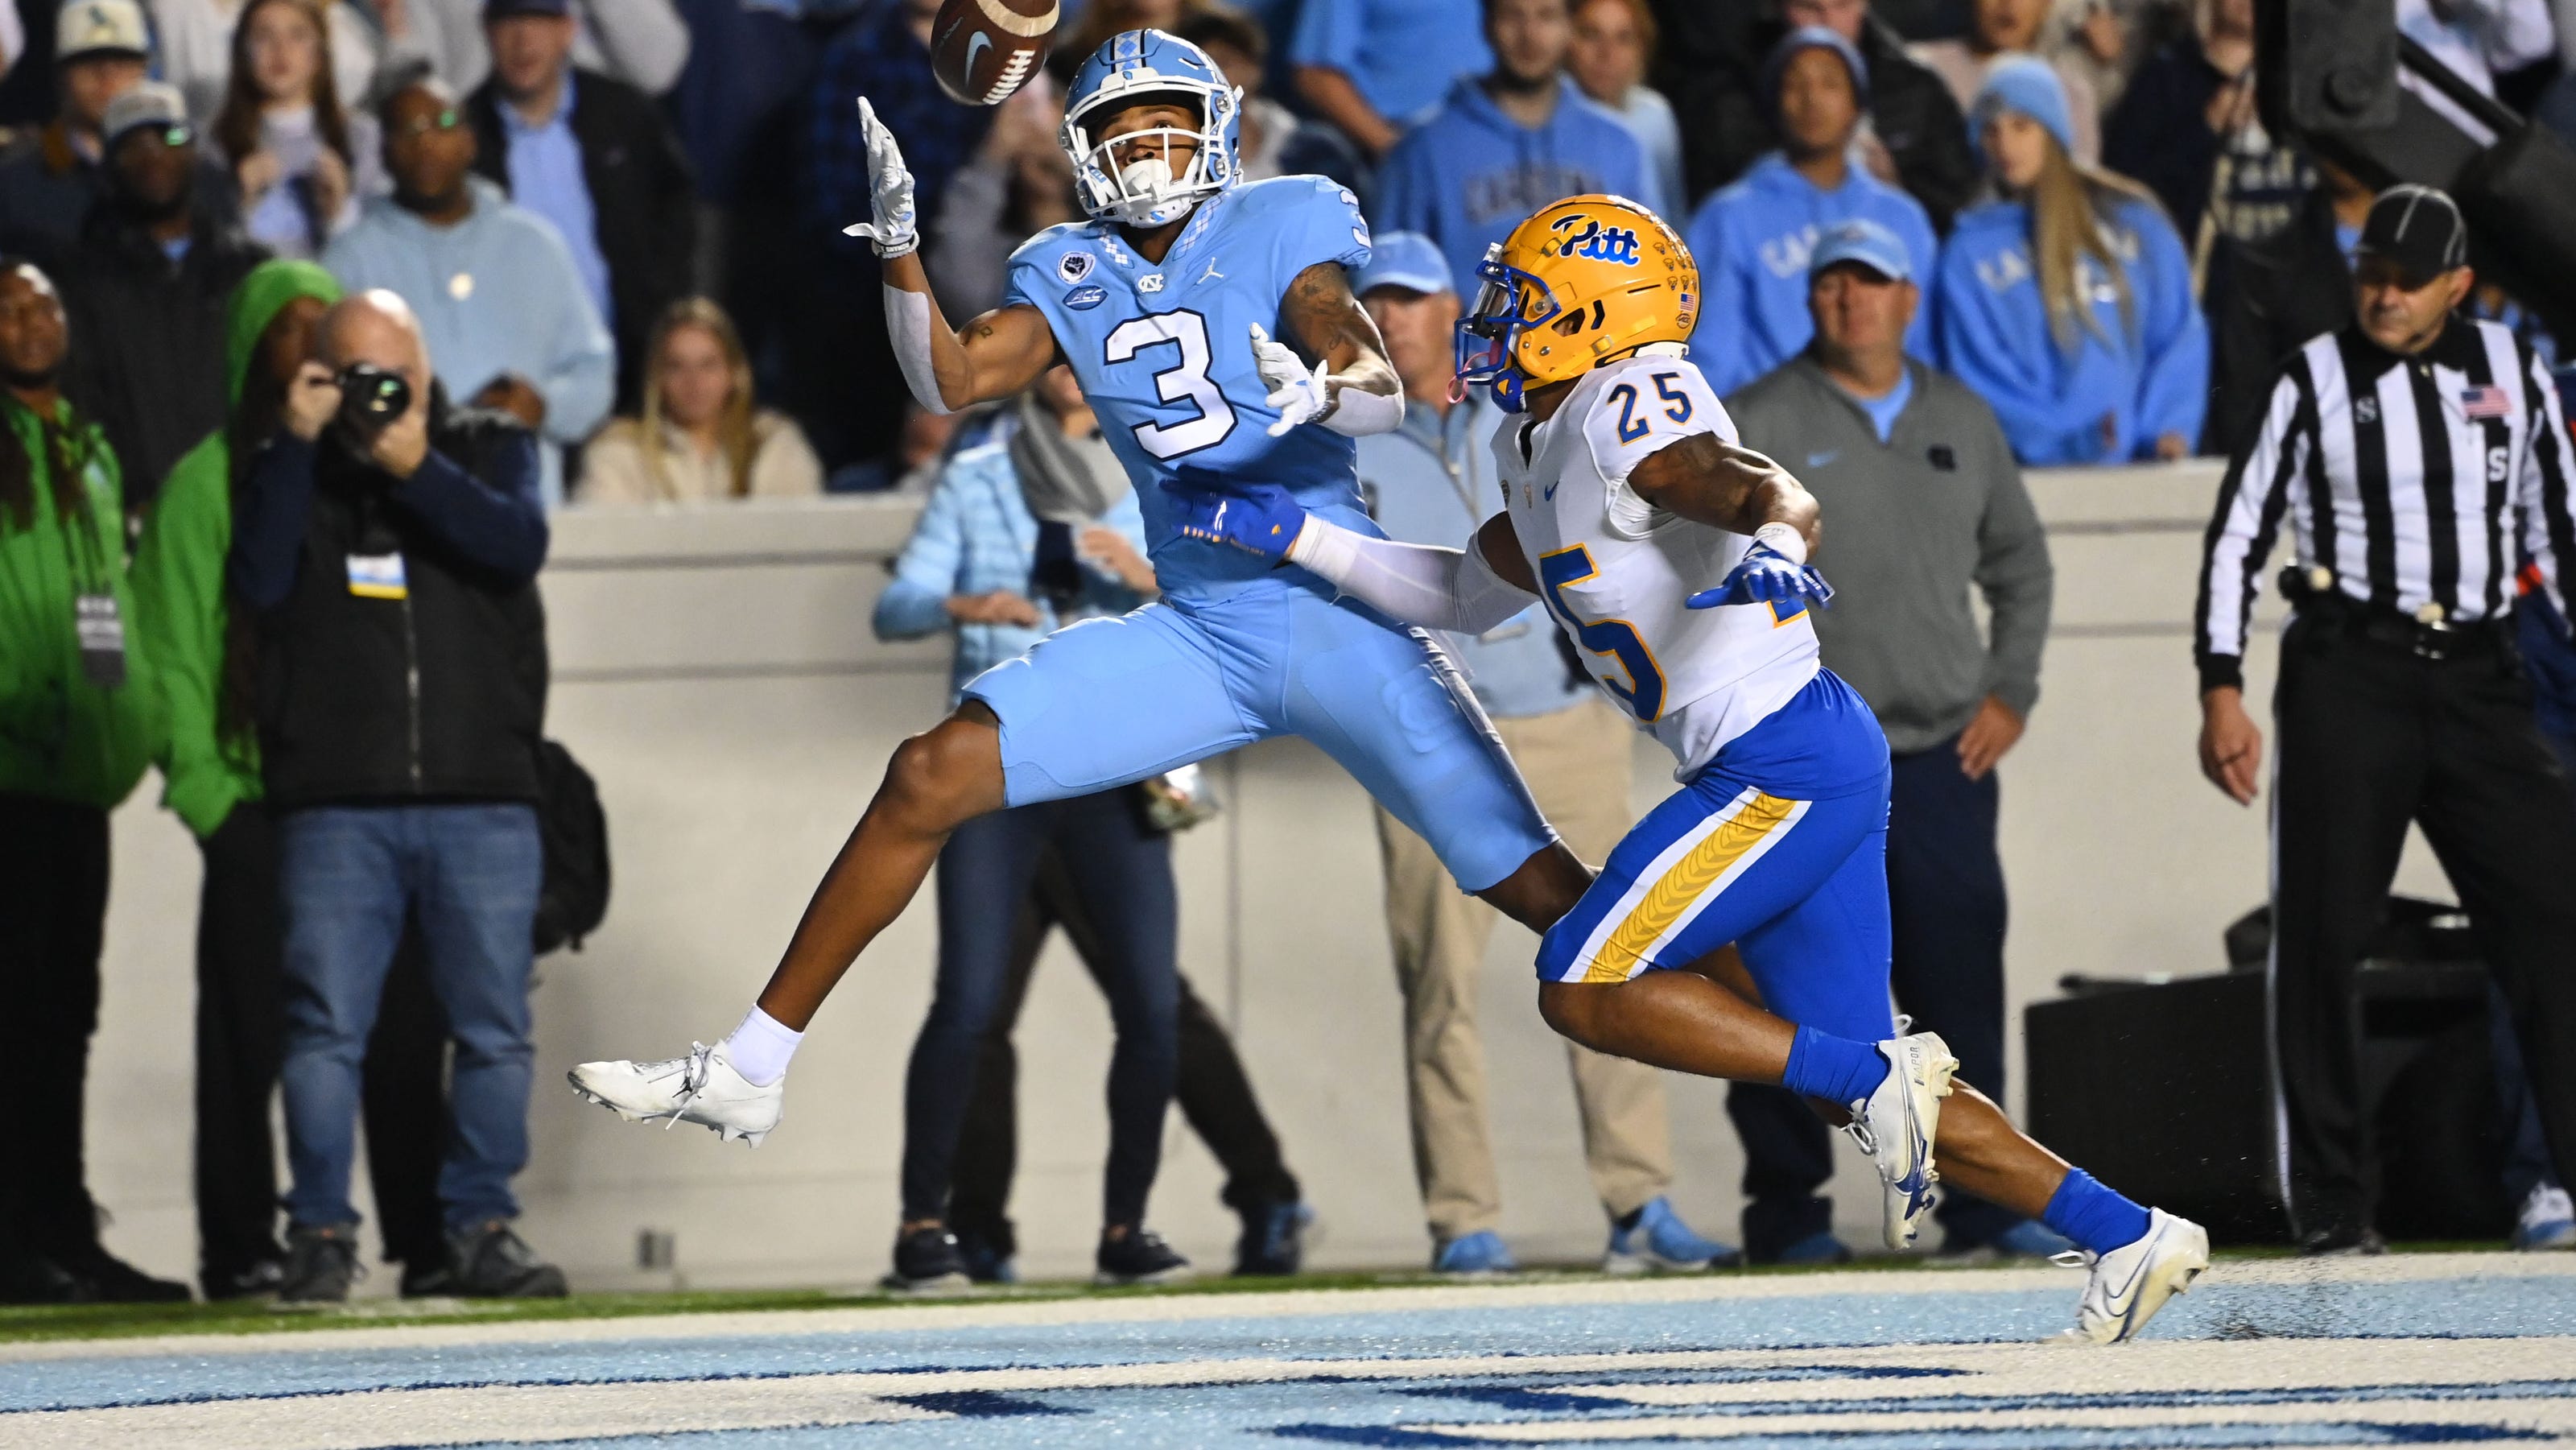 How to watch UNC football vs. Virginia on TV, live stream, plus game time